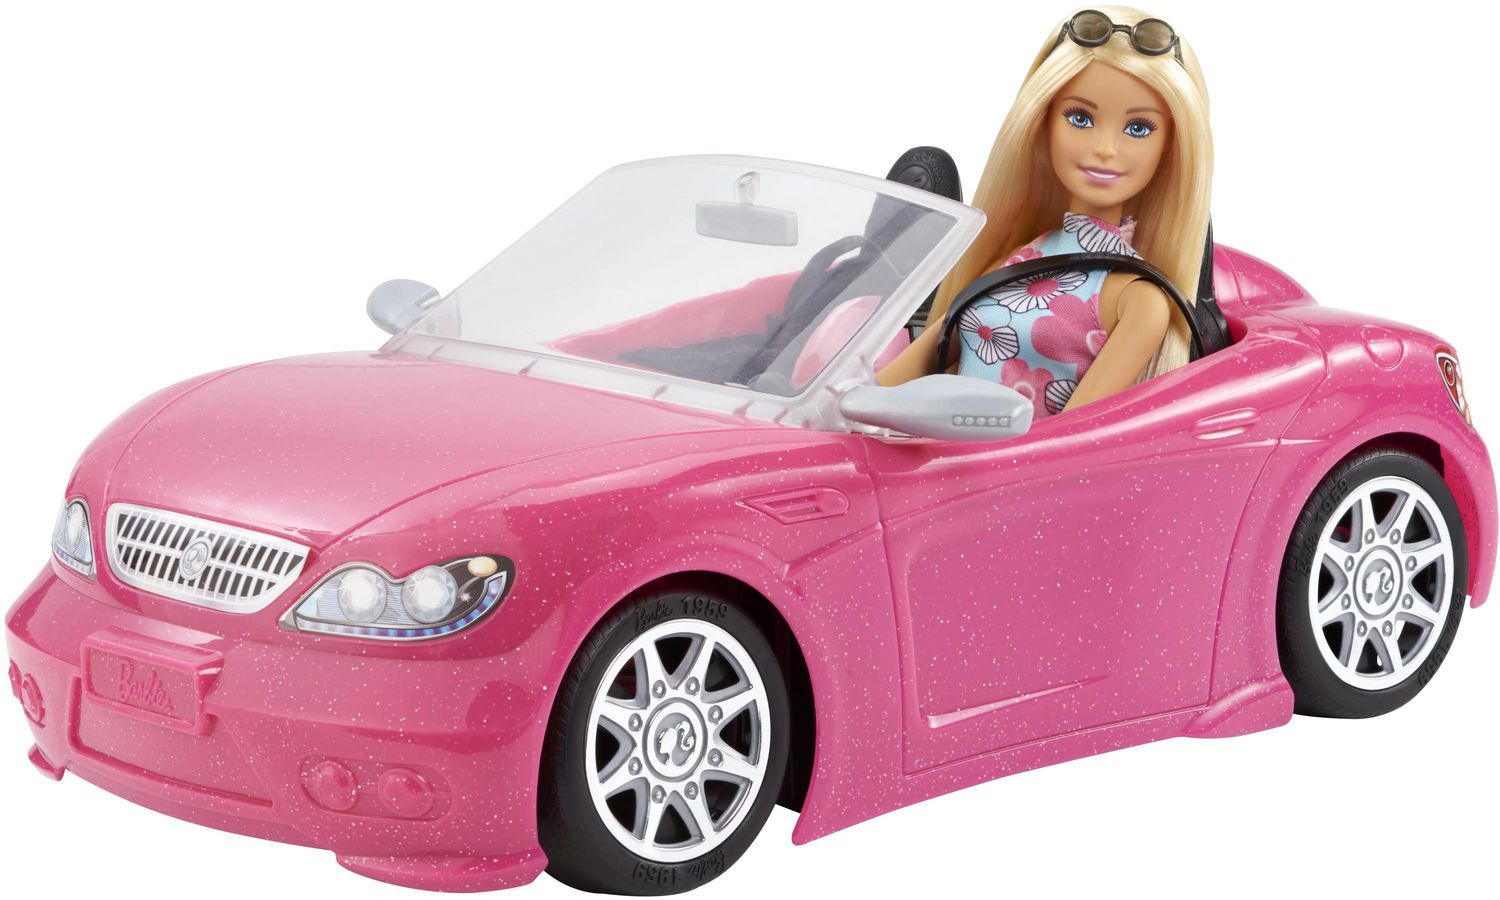 Barbie Doll and Pink Convertible